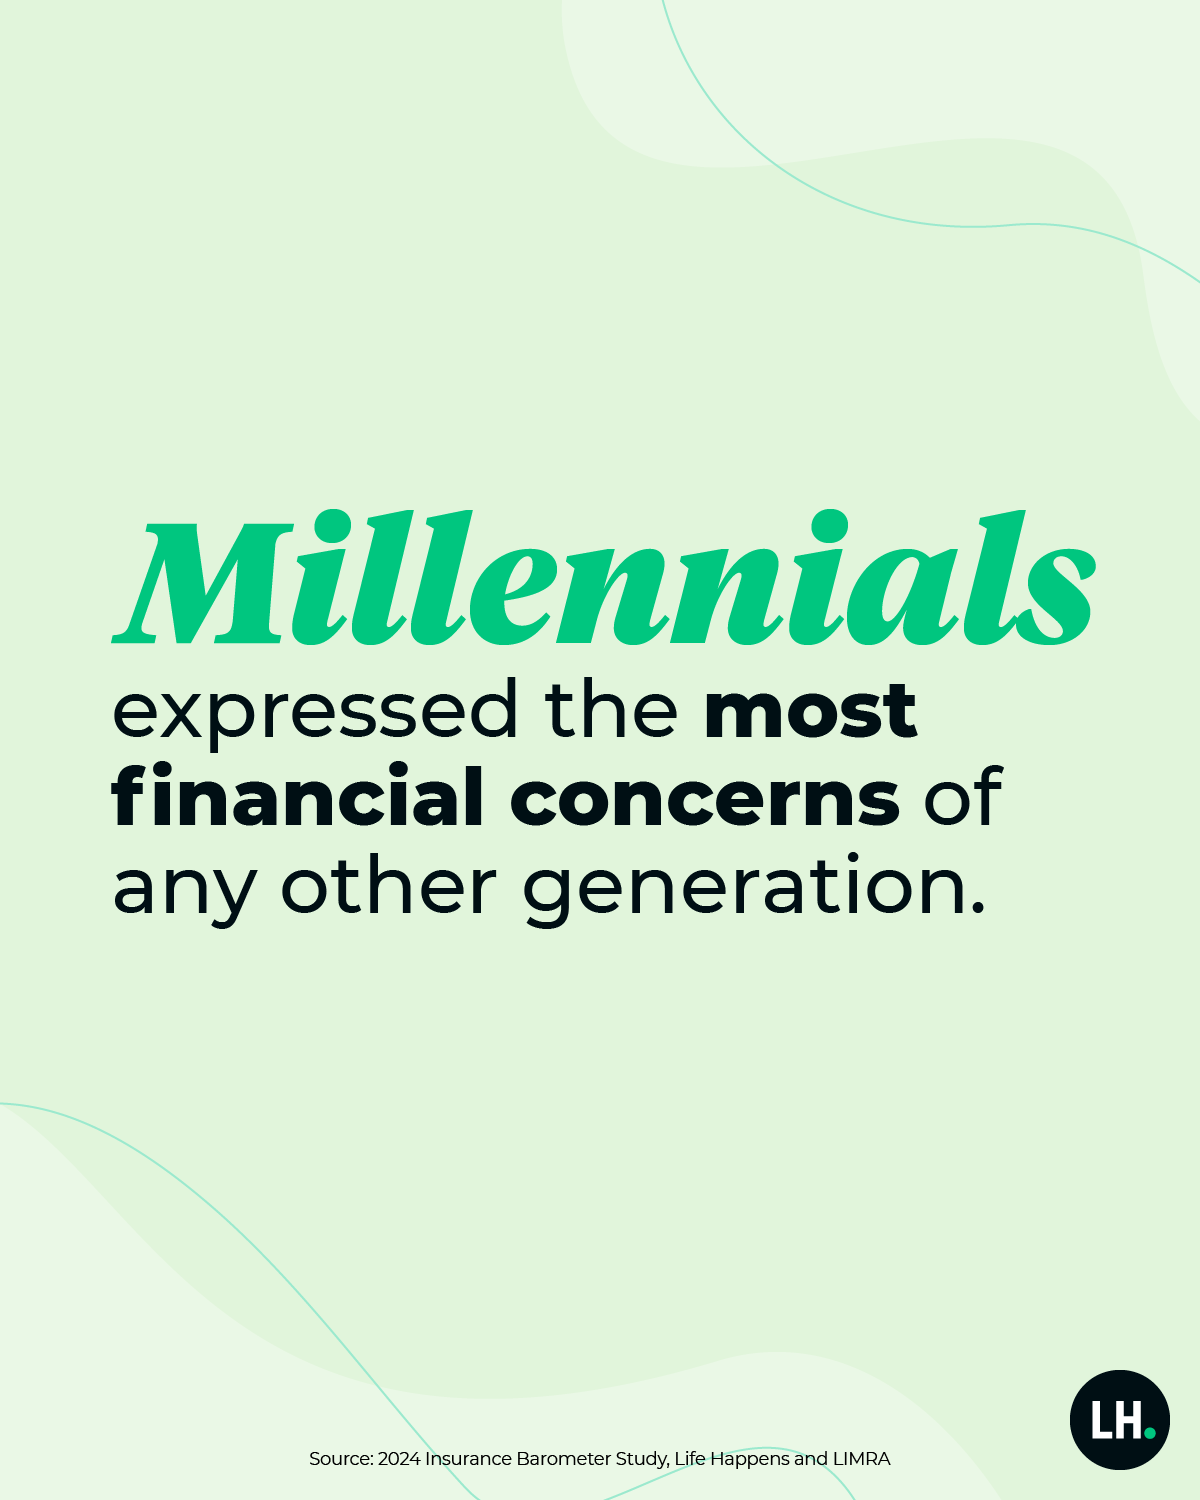 Millennials expressed the most financial concerns of any other generation.